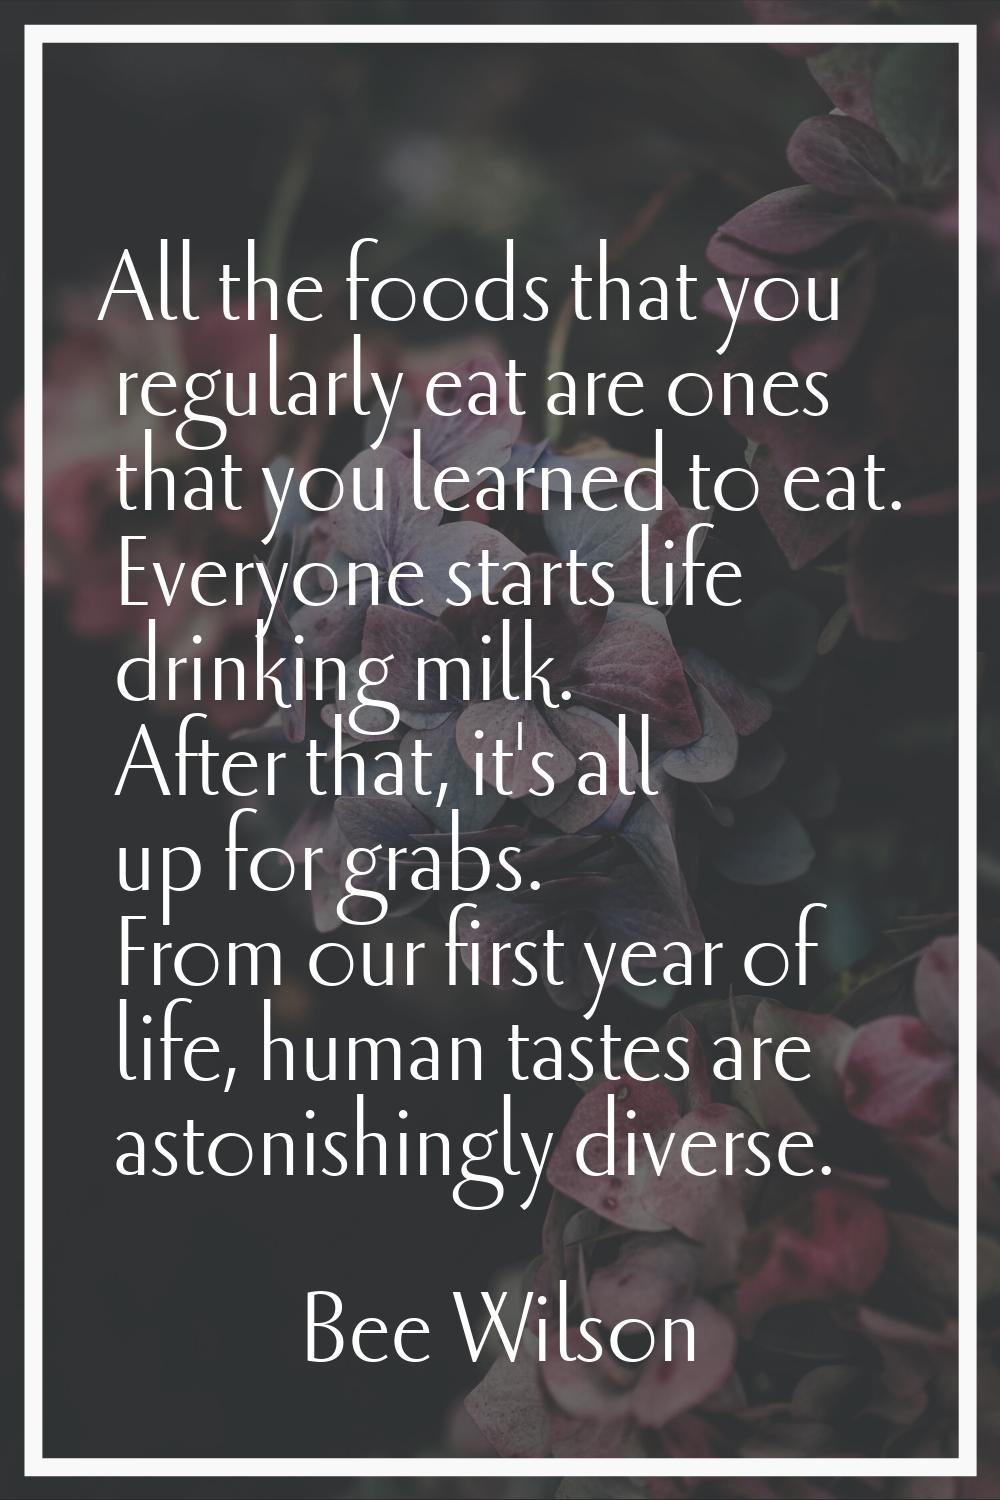 All the foods that you regularly eat are ones that you learned to eat. Everyone starts life drinkin